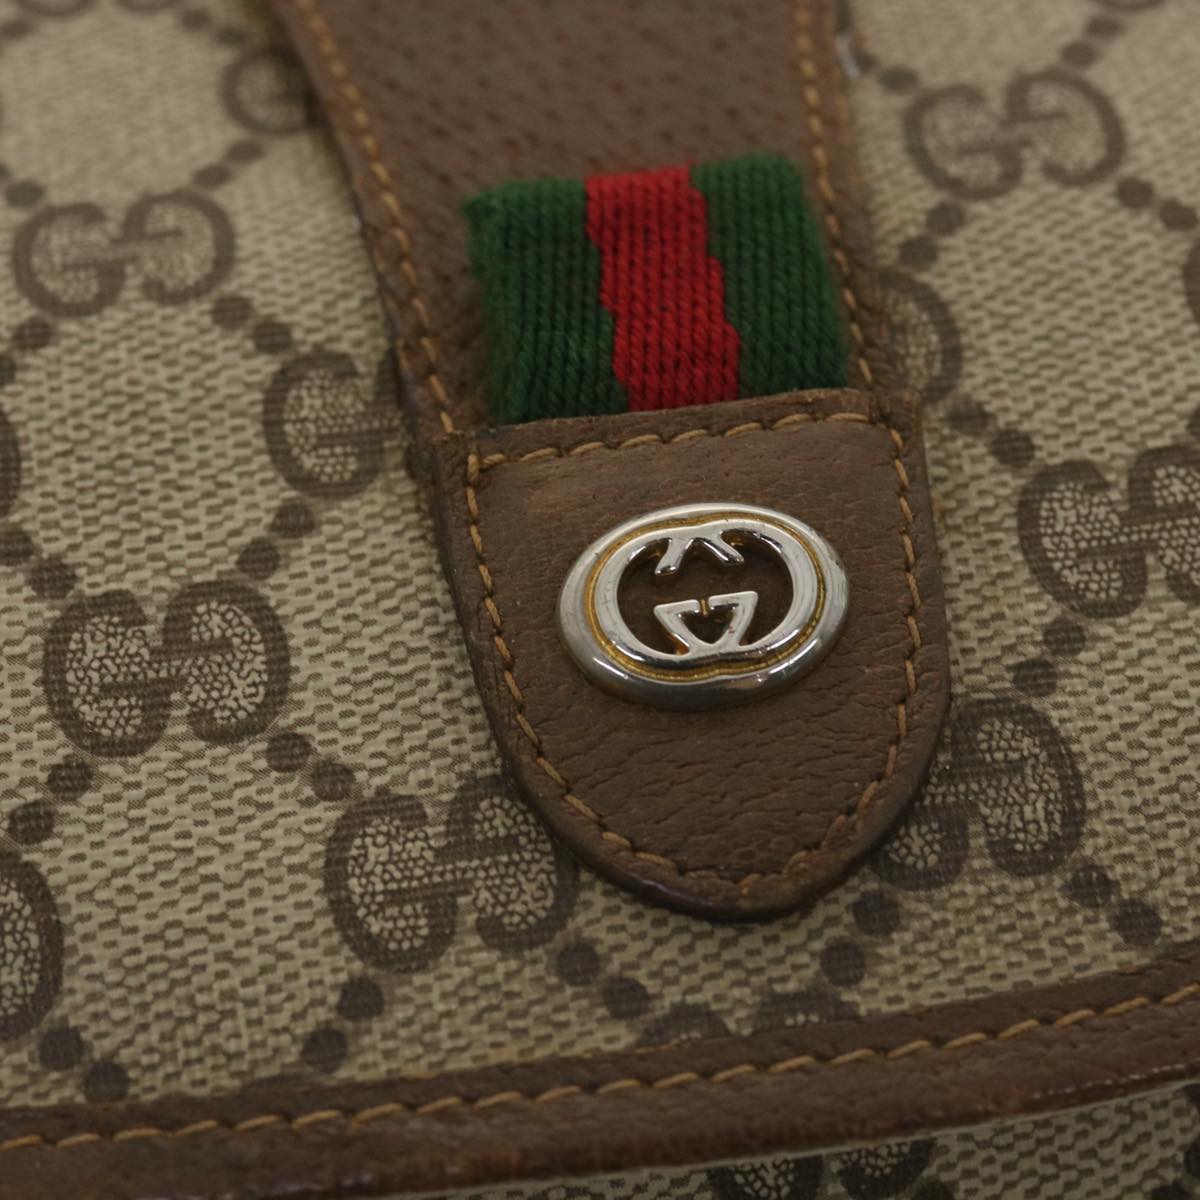 GUCCI GG Canvas Web Sherry Line Clutch Bag Beige Green Red 89.01.030 Auth ny214